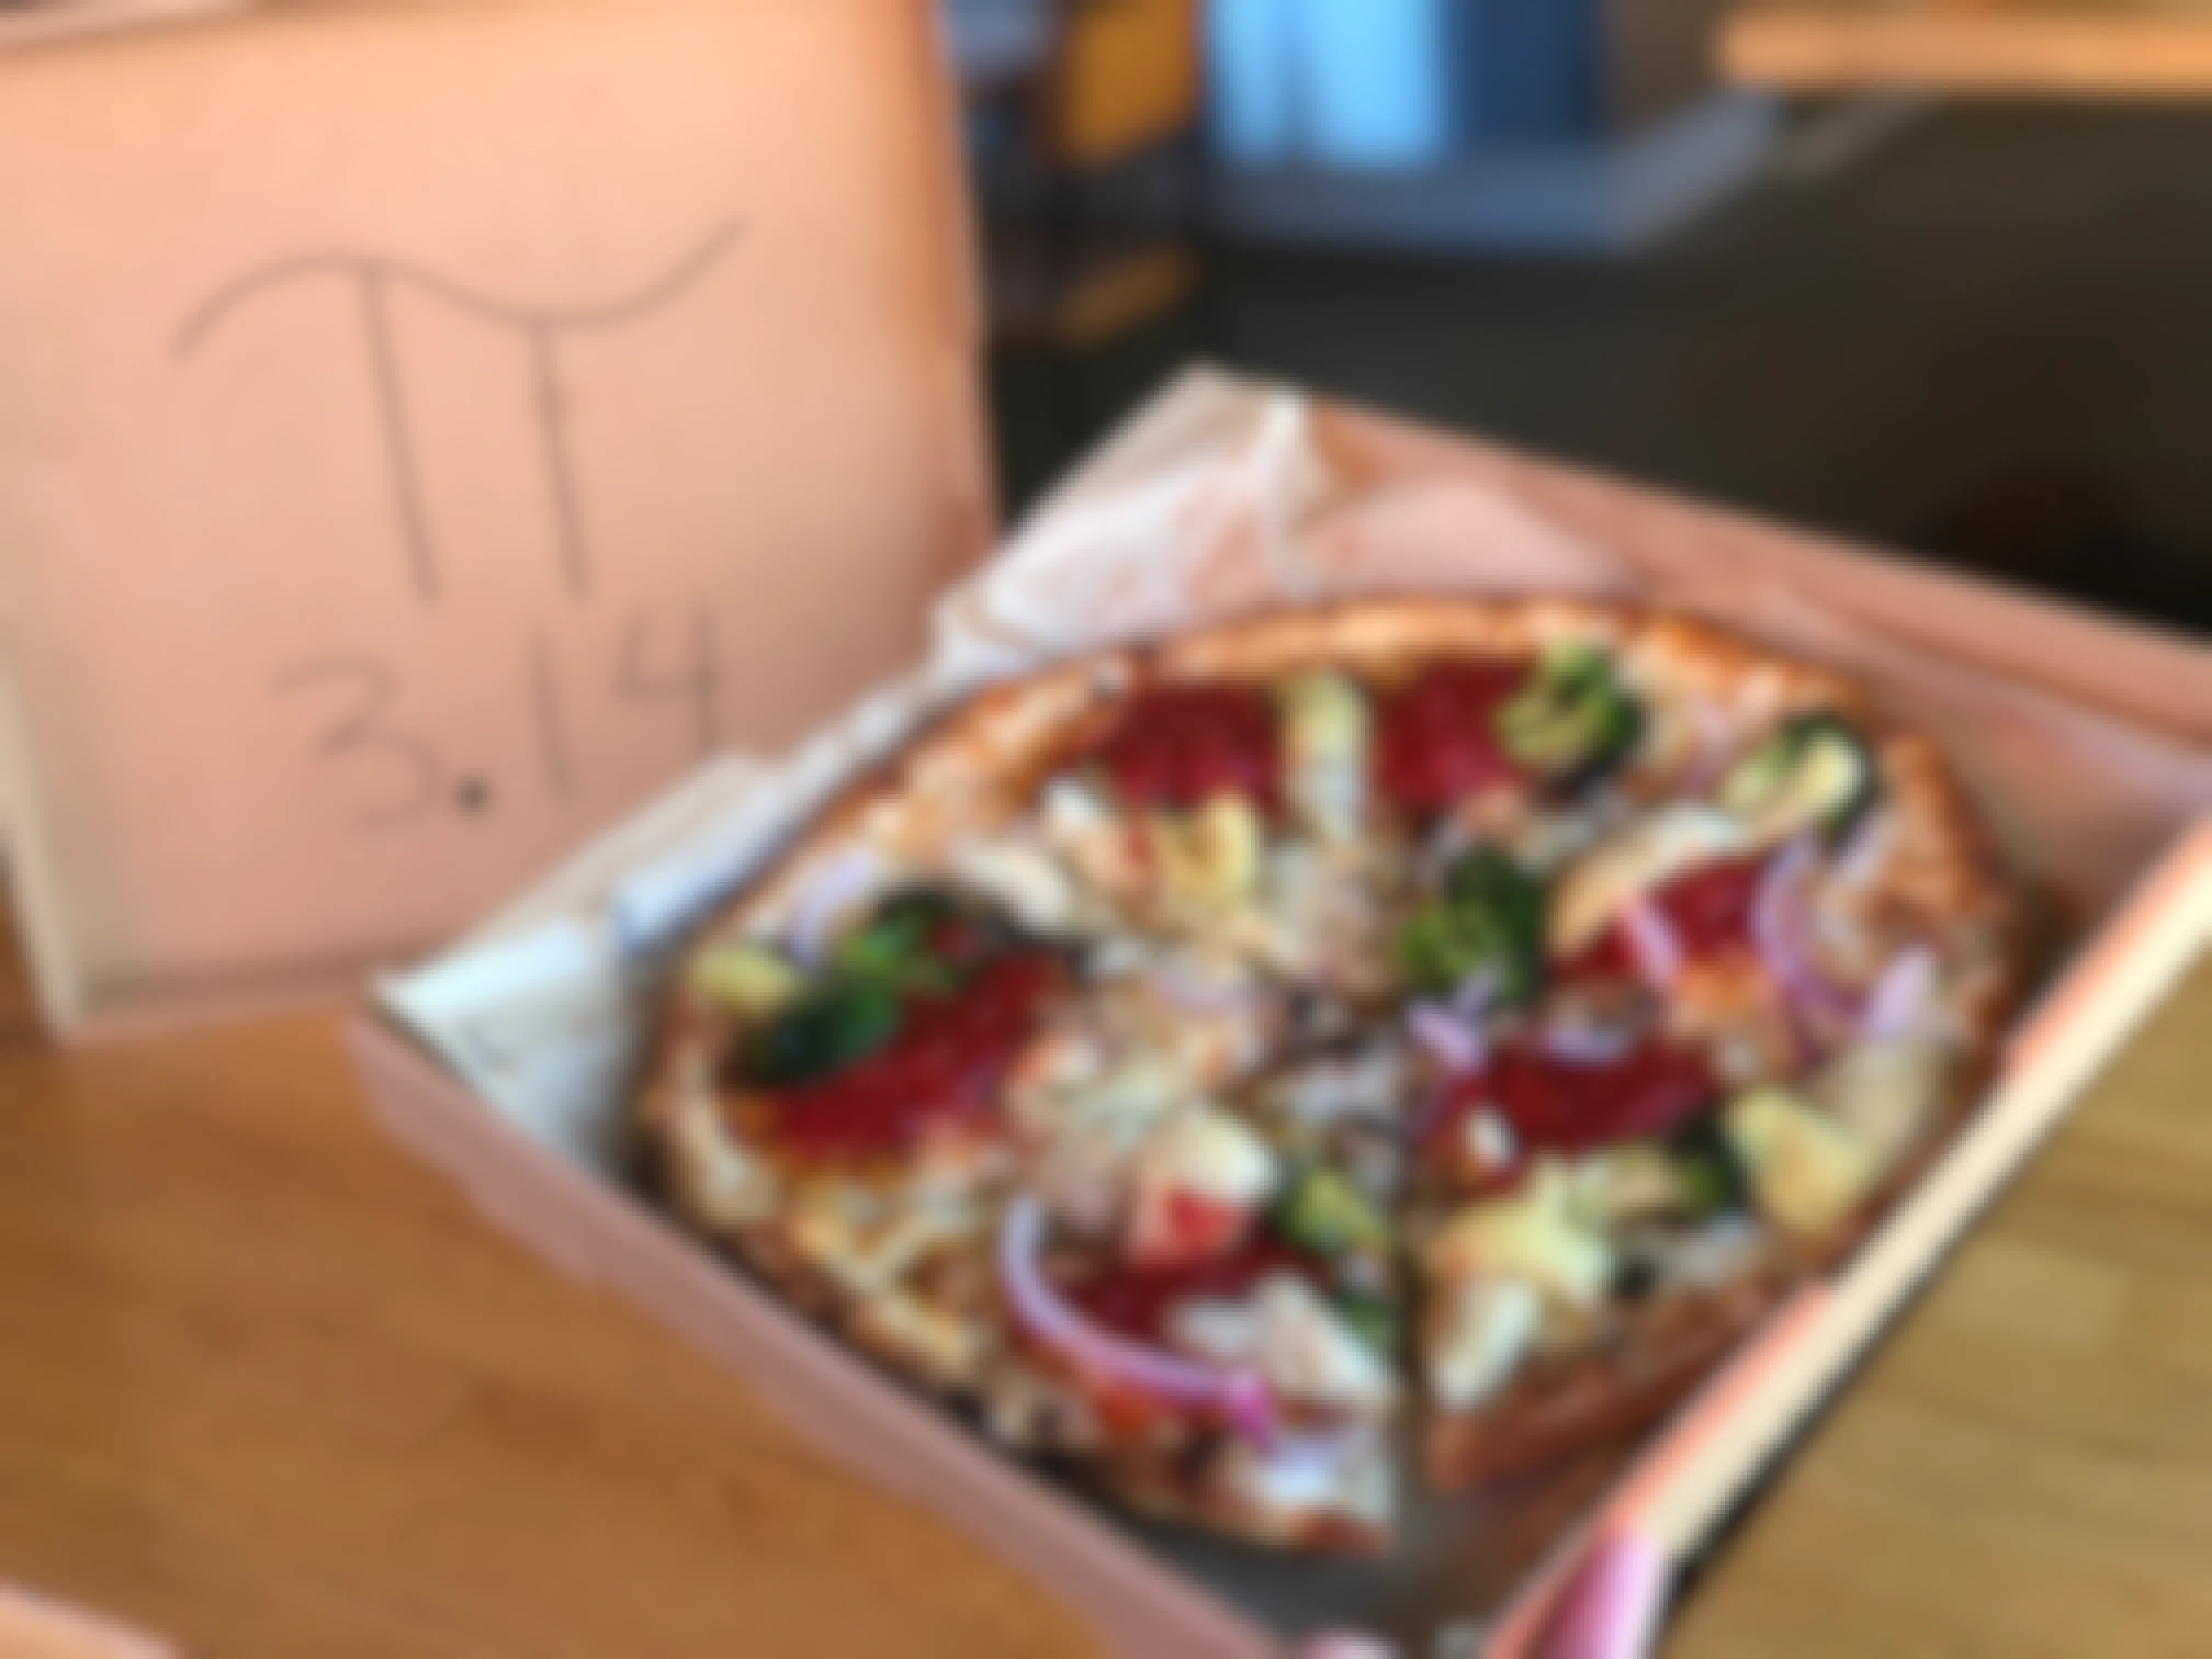 A Blaze pizza being held up inside of a box with no top. The top is displayed in the background with the Pi symbol and 